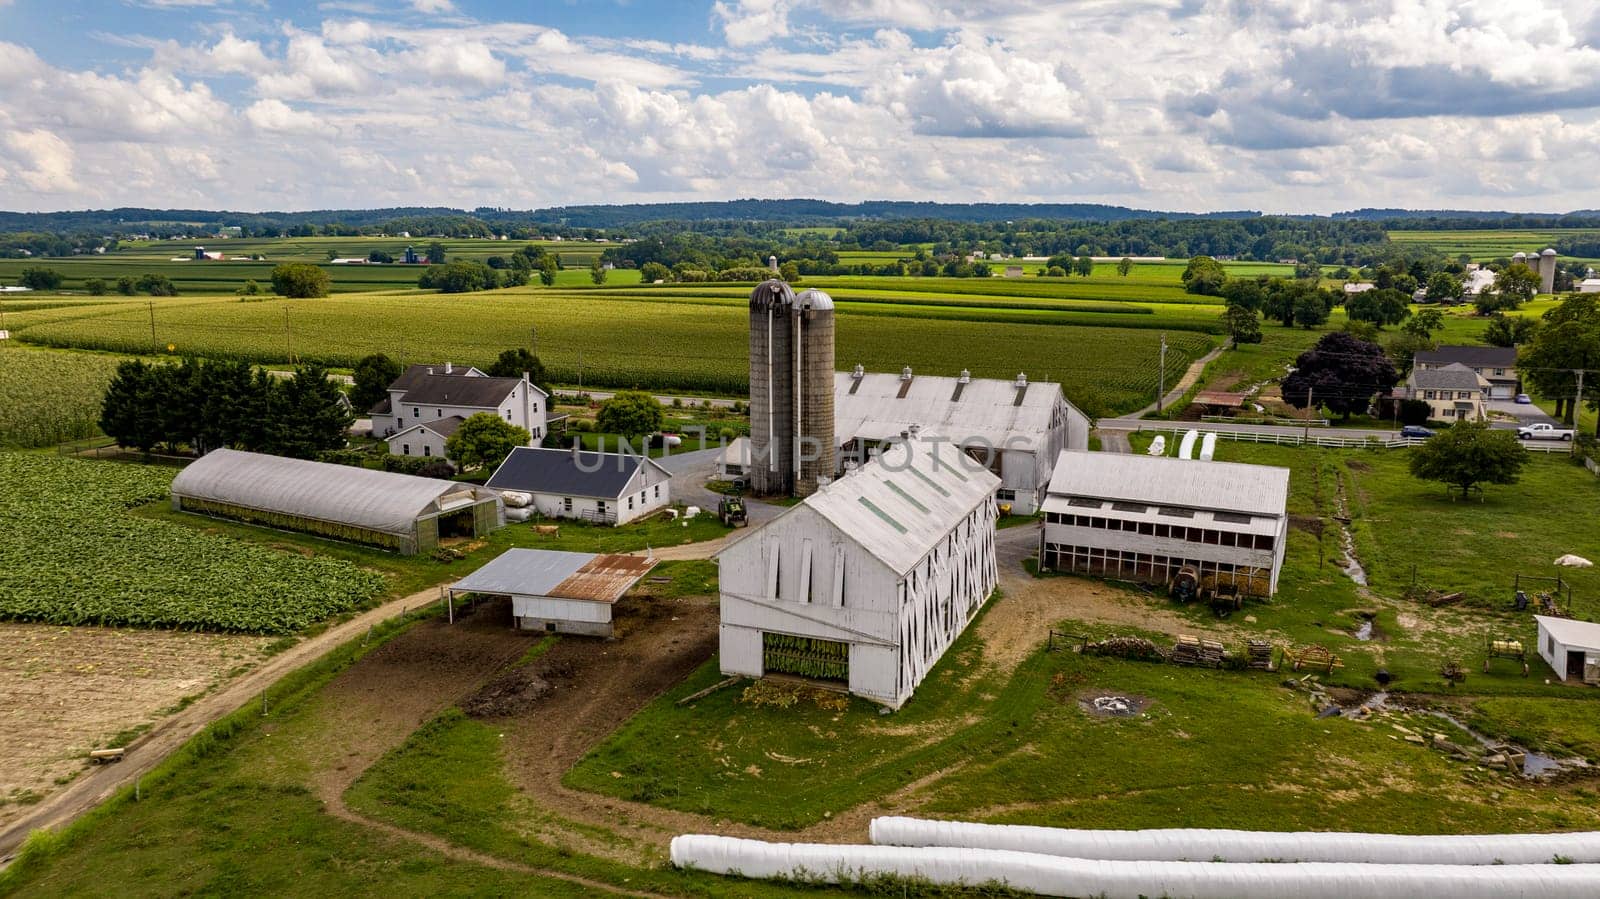 Ronks, Pennsylvania, August 15, 2023 - Above the patchwork fields, this traditional farm homestead stands with its silo and barns, a testament to timeless agricultural practices.